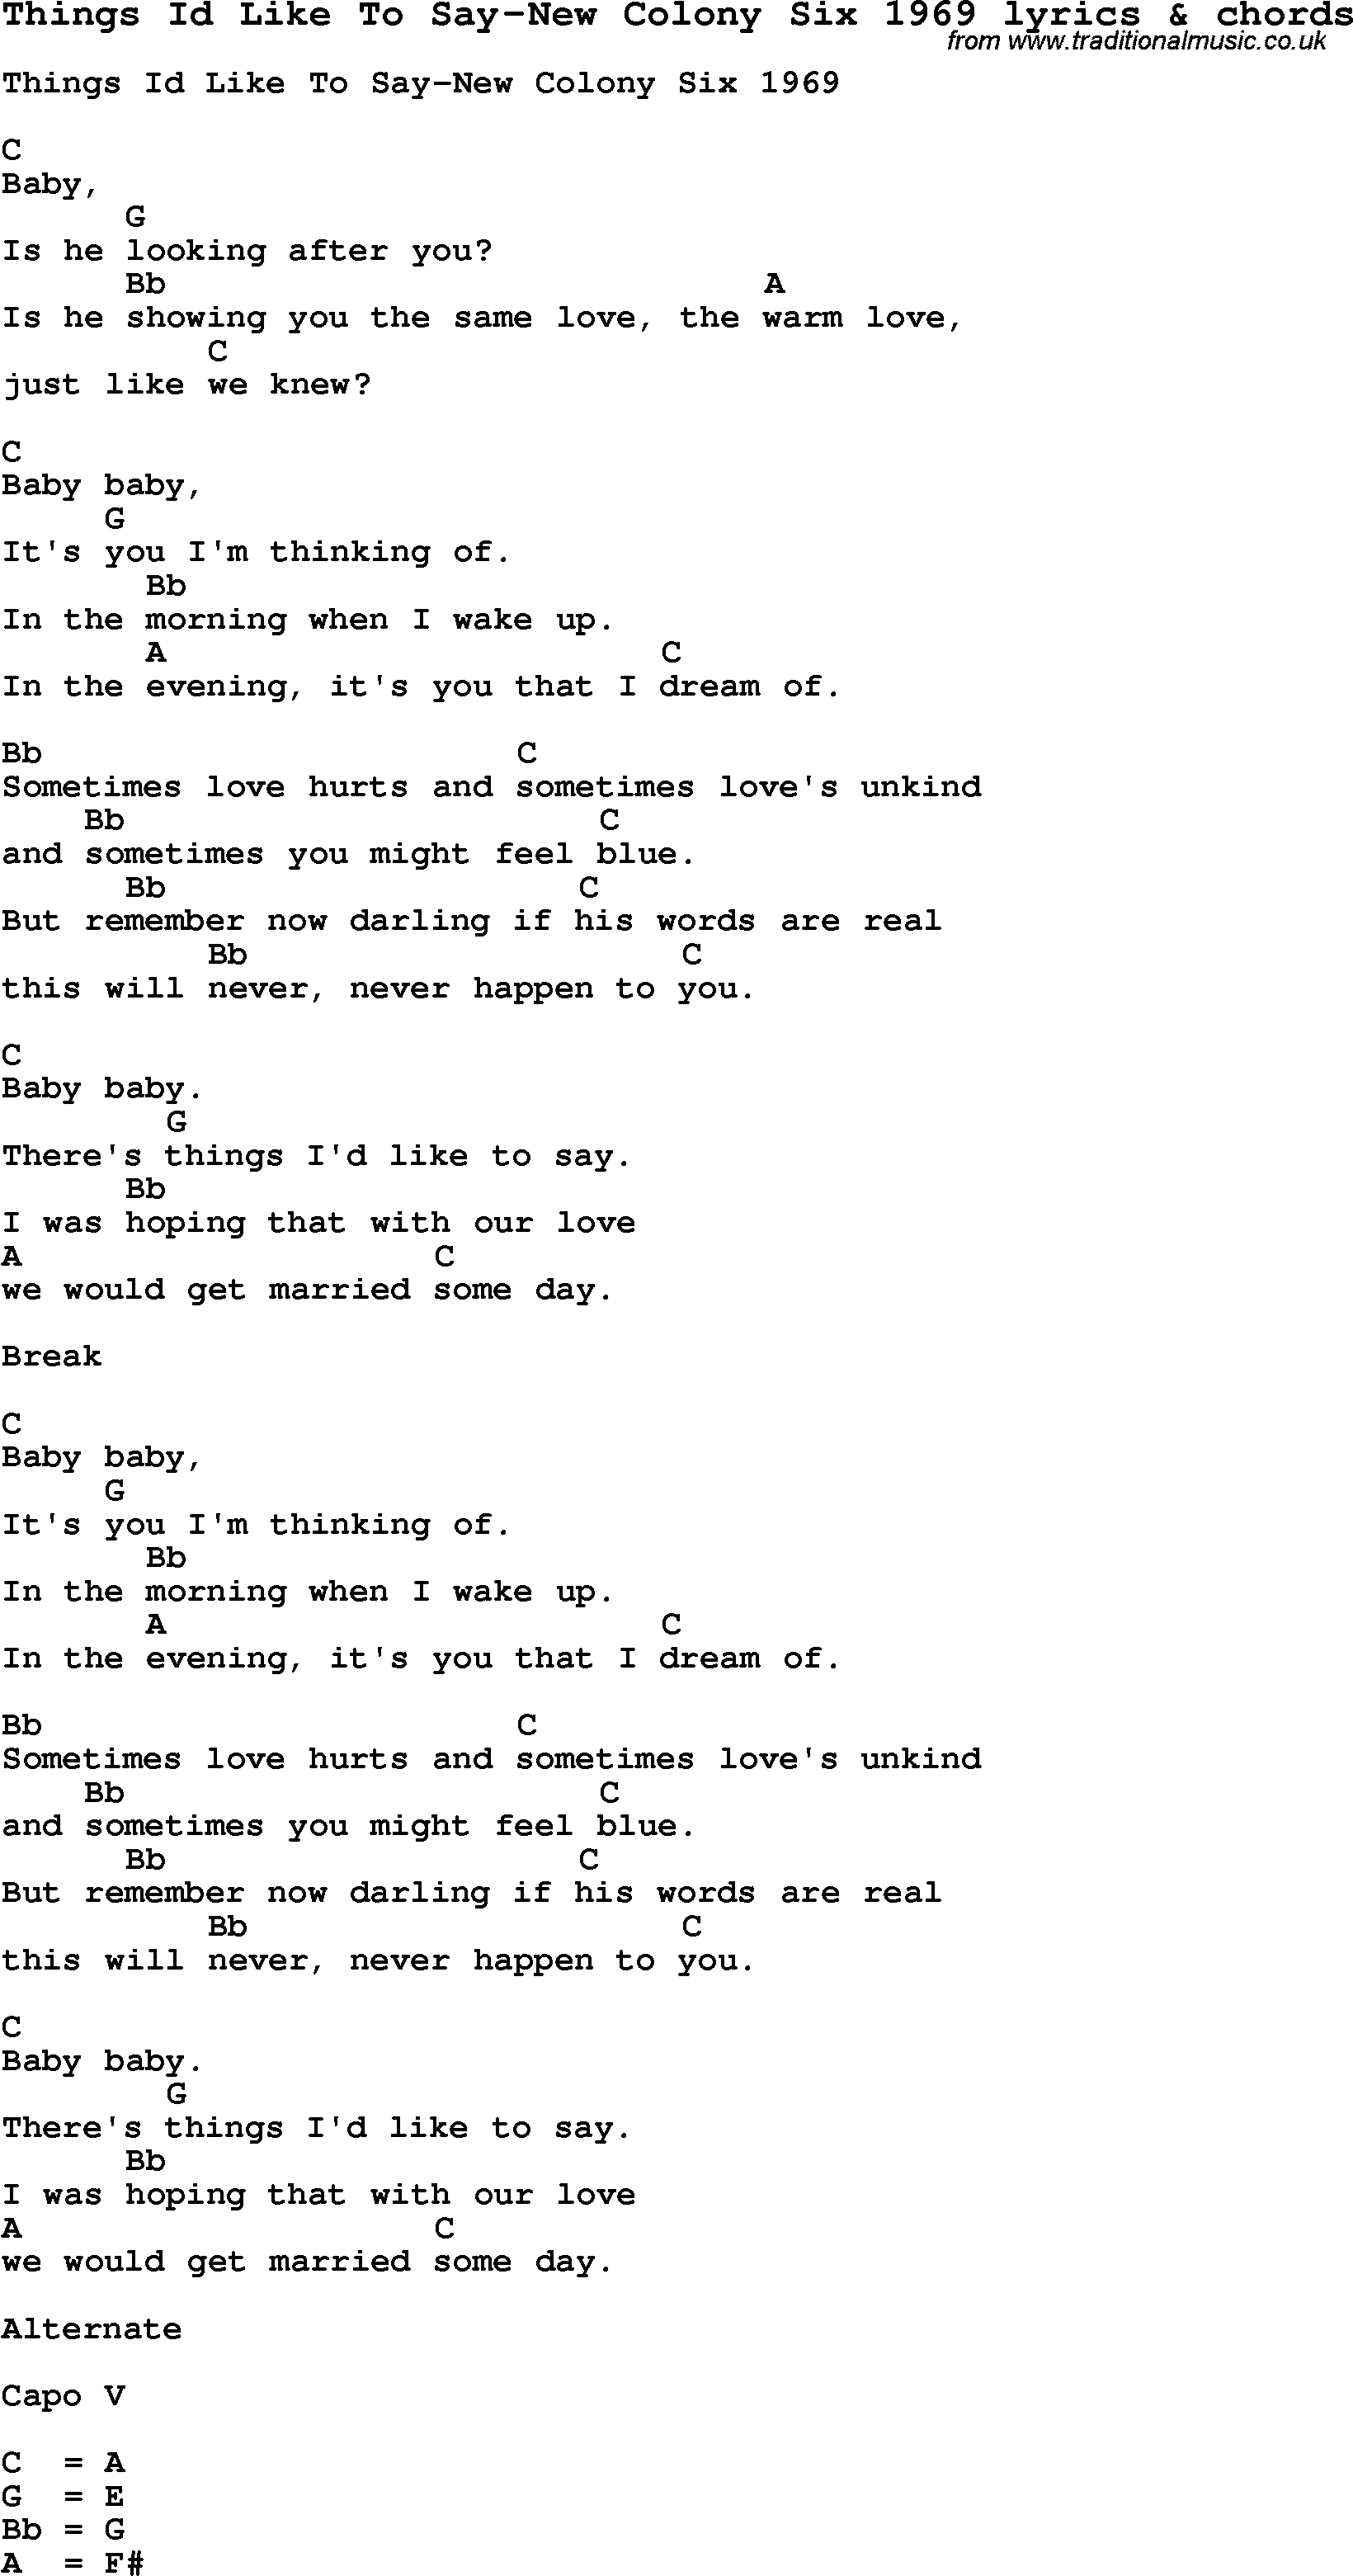 Love Song Lyrics for: Things Id Like To Say-New Colony Six 1969 with chords for Ukulele, Guitar Banjo etc.